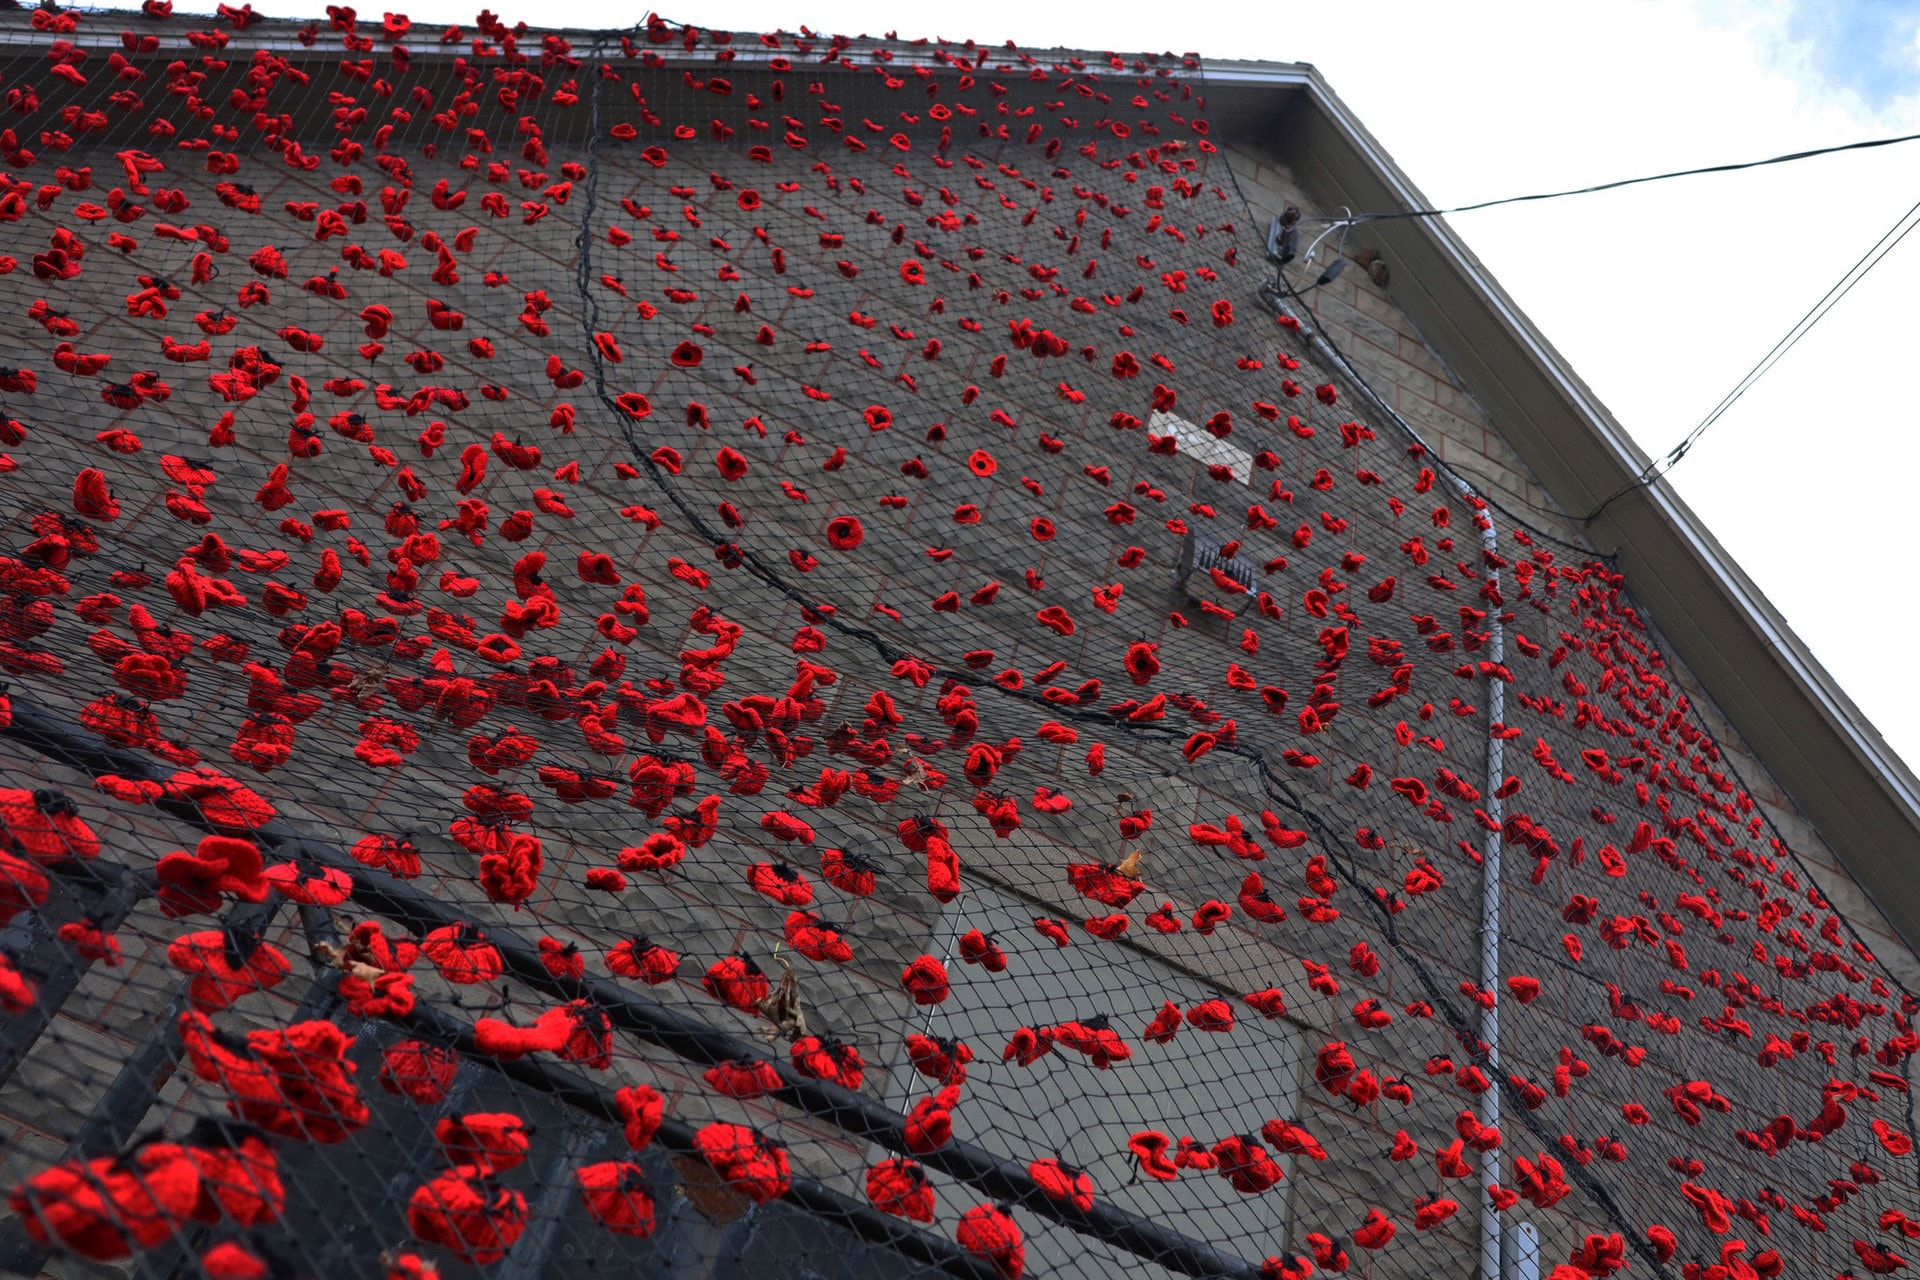 Volunteer firefighters from Station 81 help hang the poppies at the Goulbourn Museum